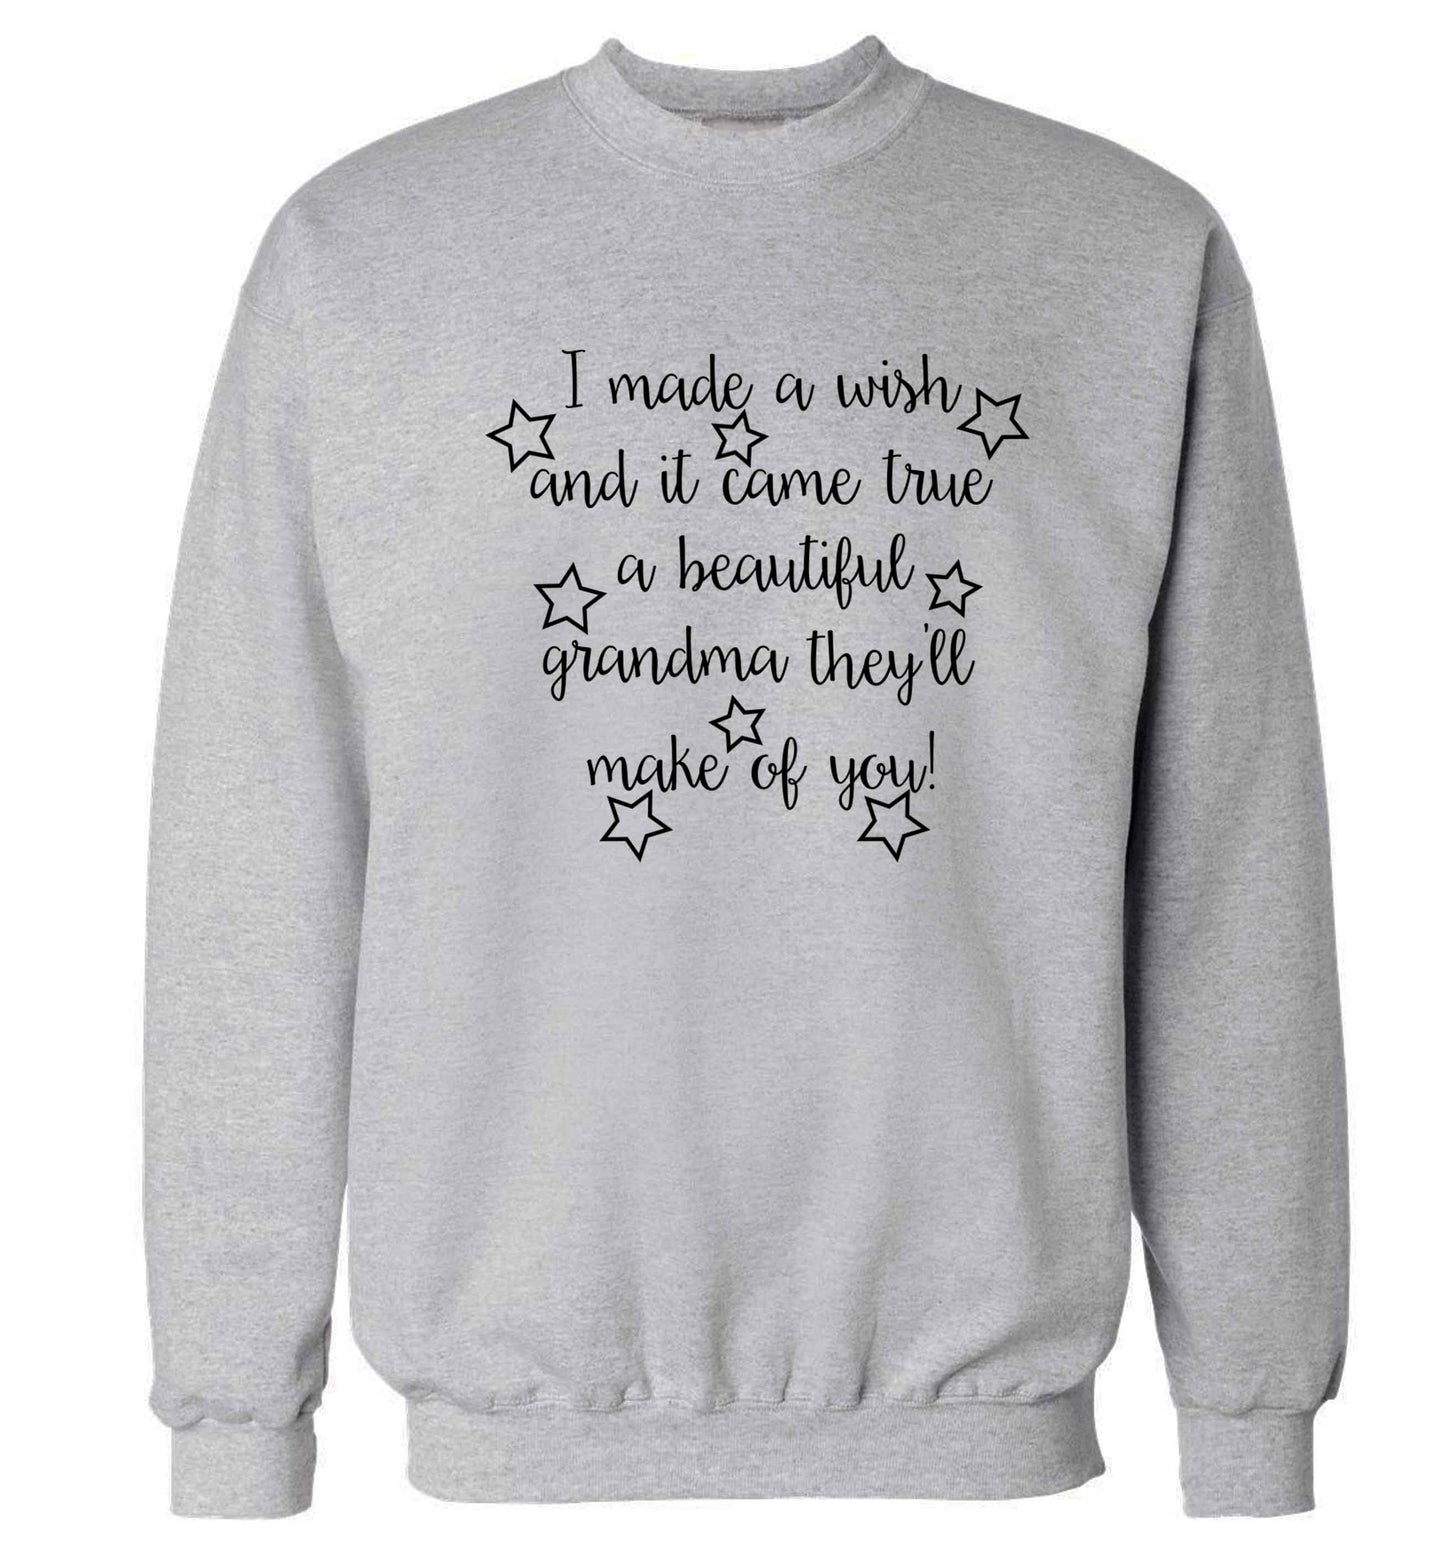 I made a wish and it came true a beautiful grandma they'll make of you! Adult's unisex grey Sweater 2XL